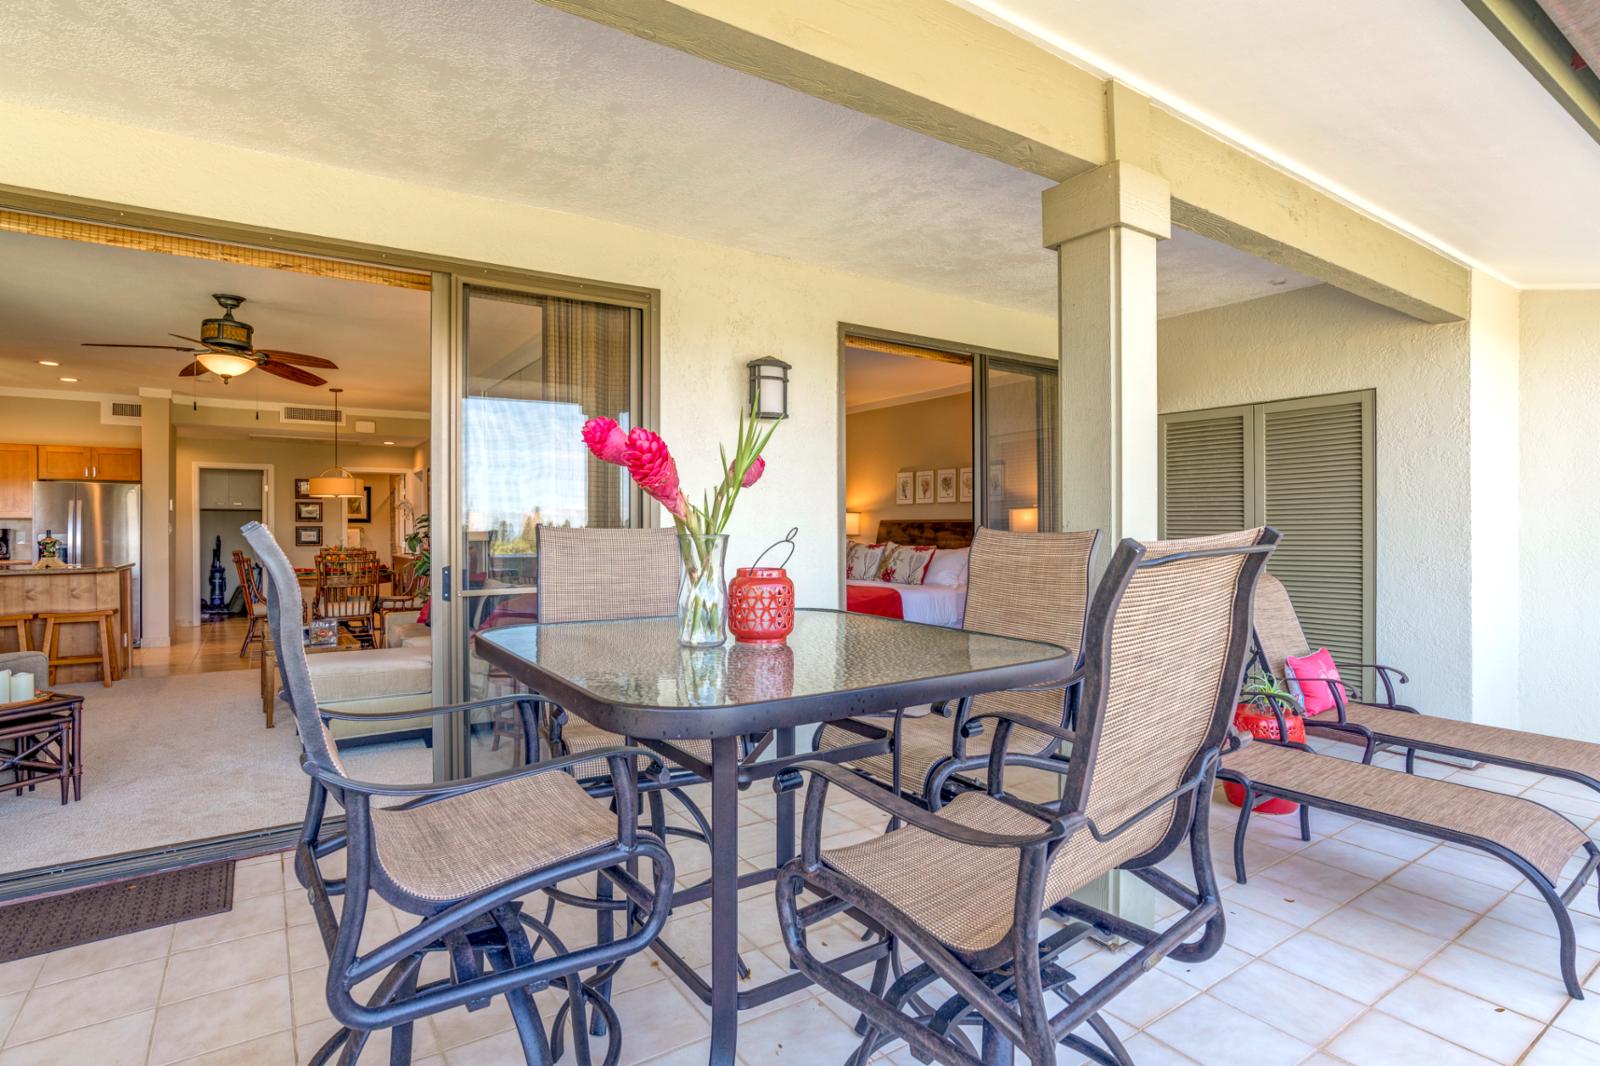 Luxury outdoor setting, chaise lounges, and oversized layout. Perfect for sunsets!